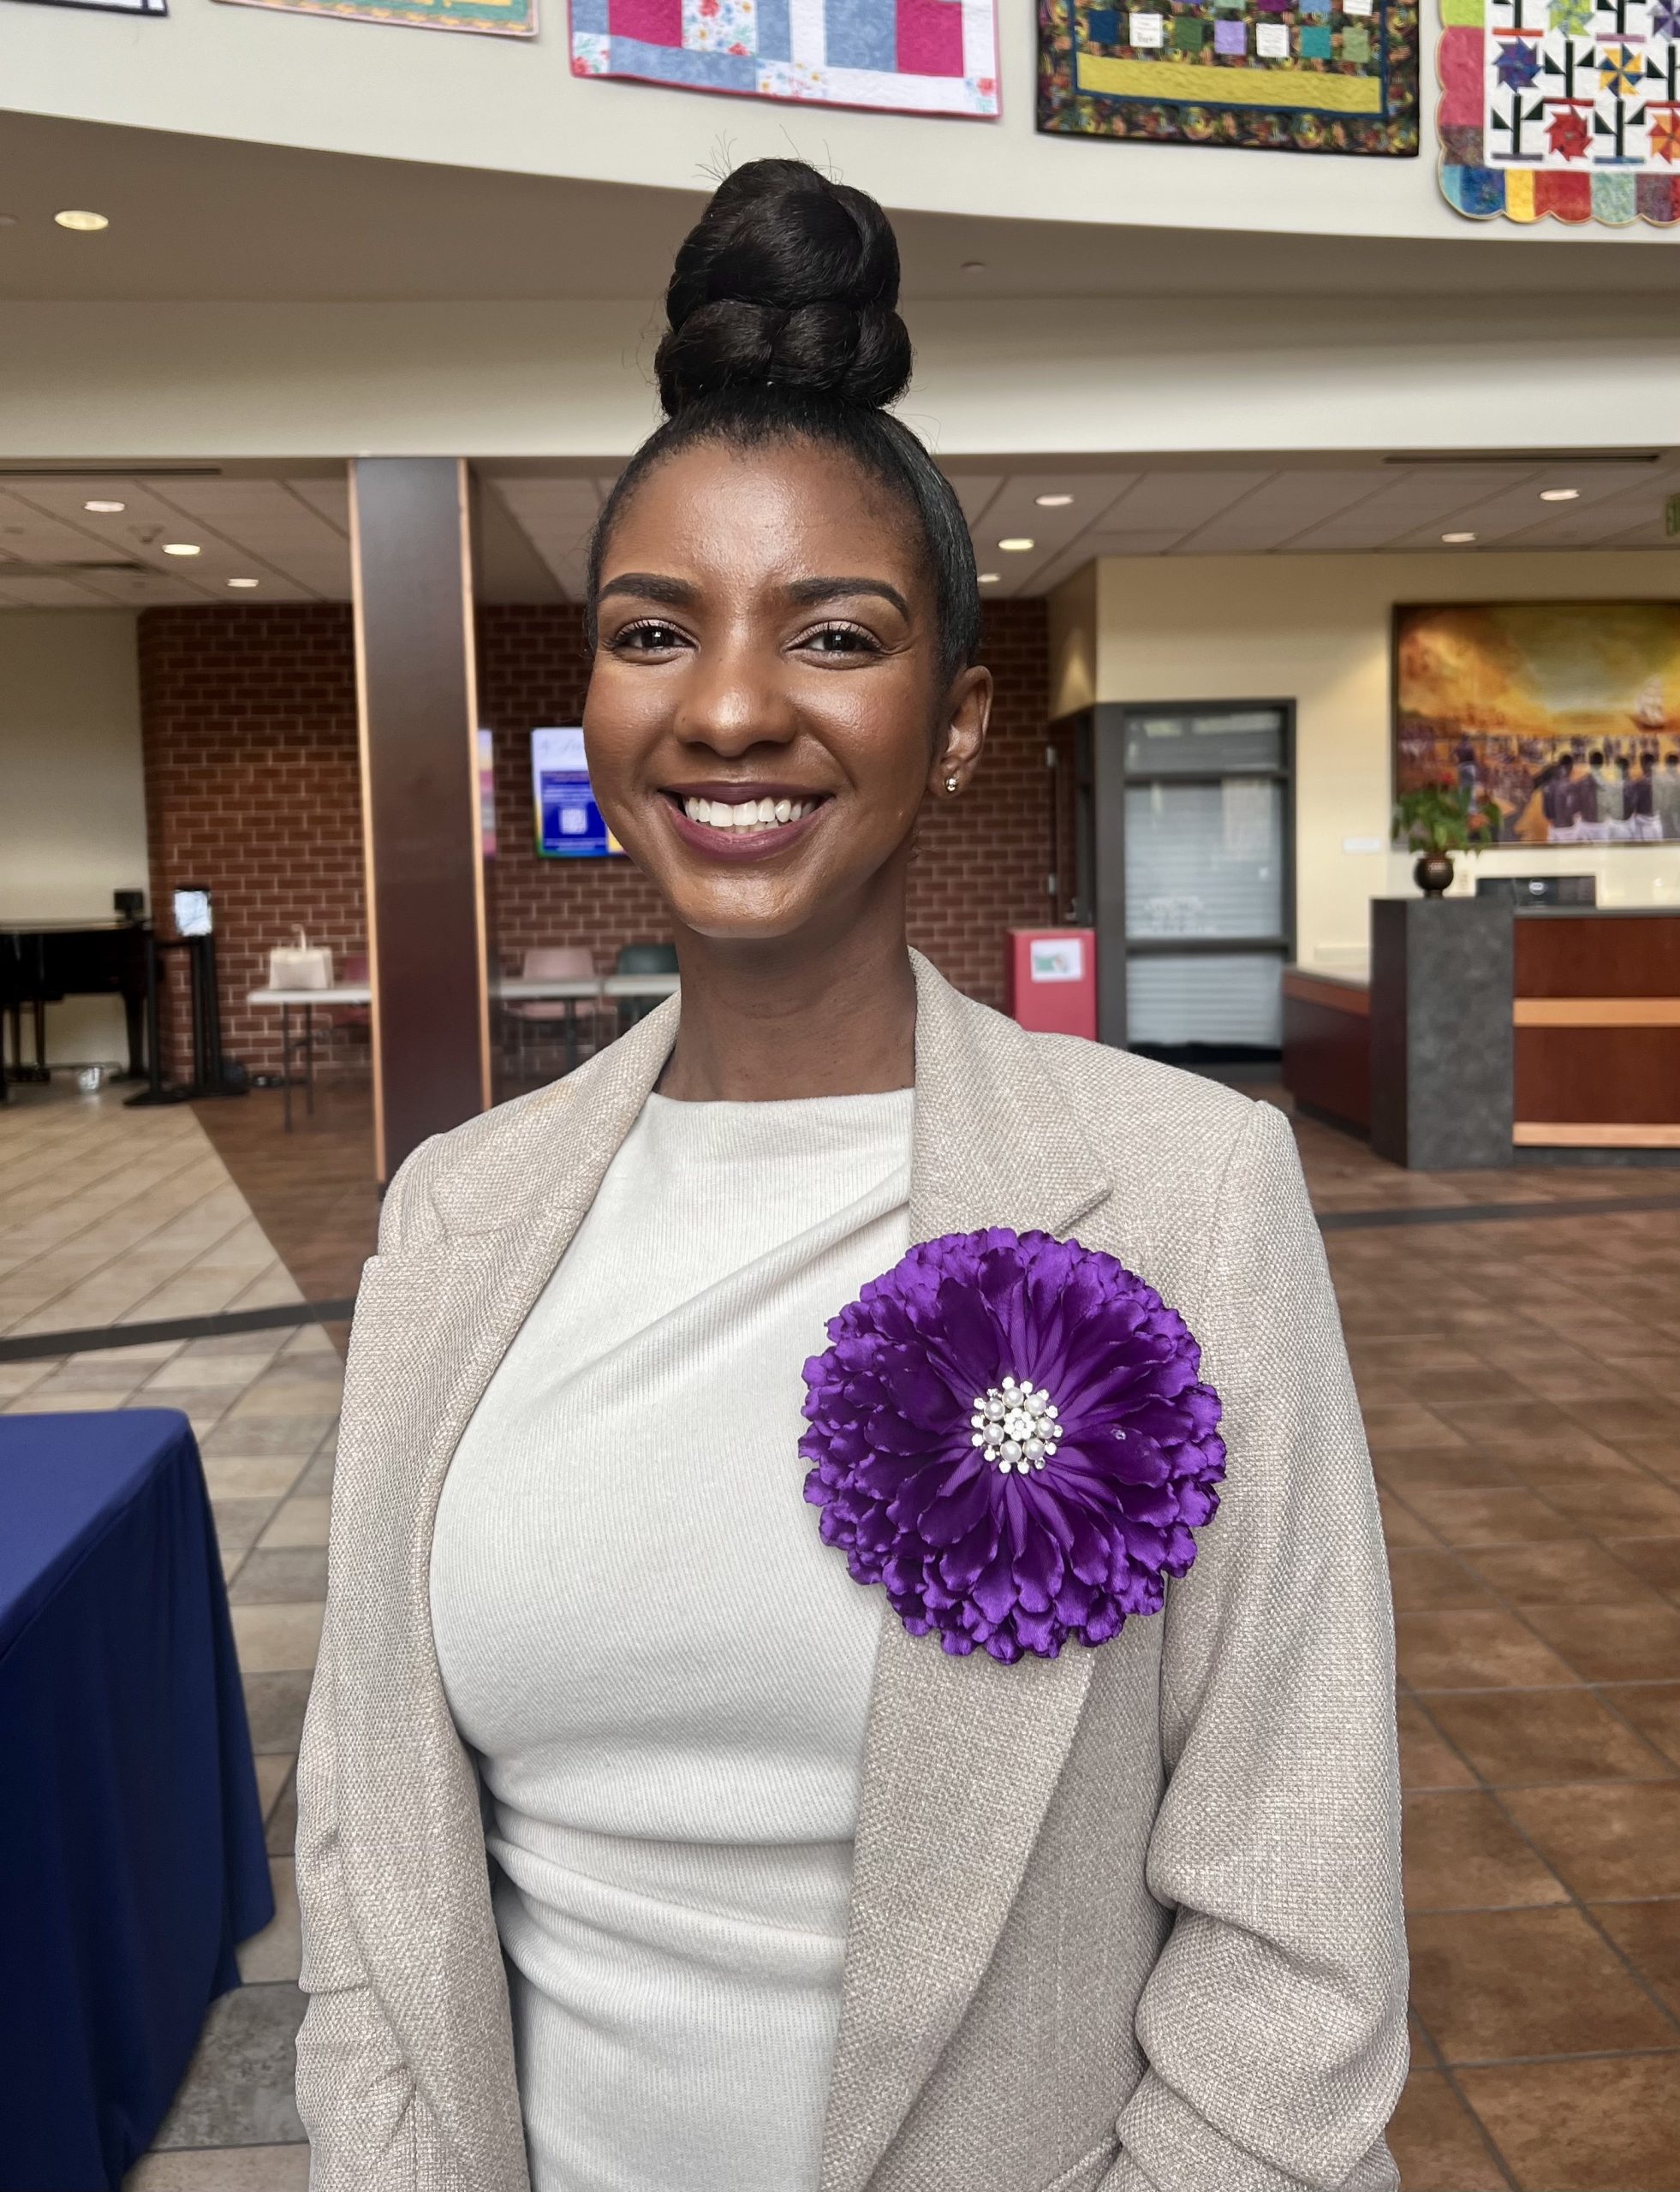 A Black woman in a tan dress with a purple flower on the lapel smiles for a photo